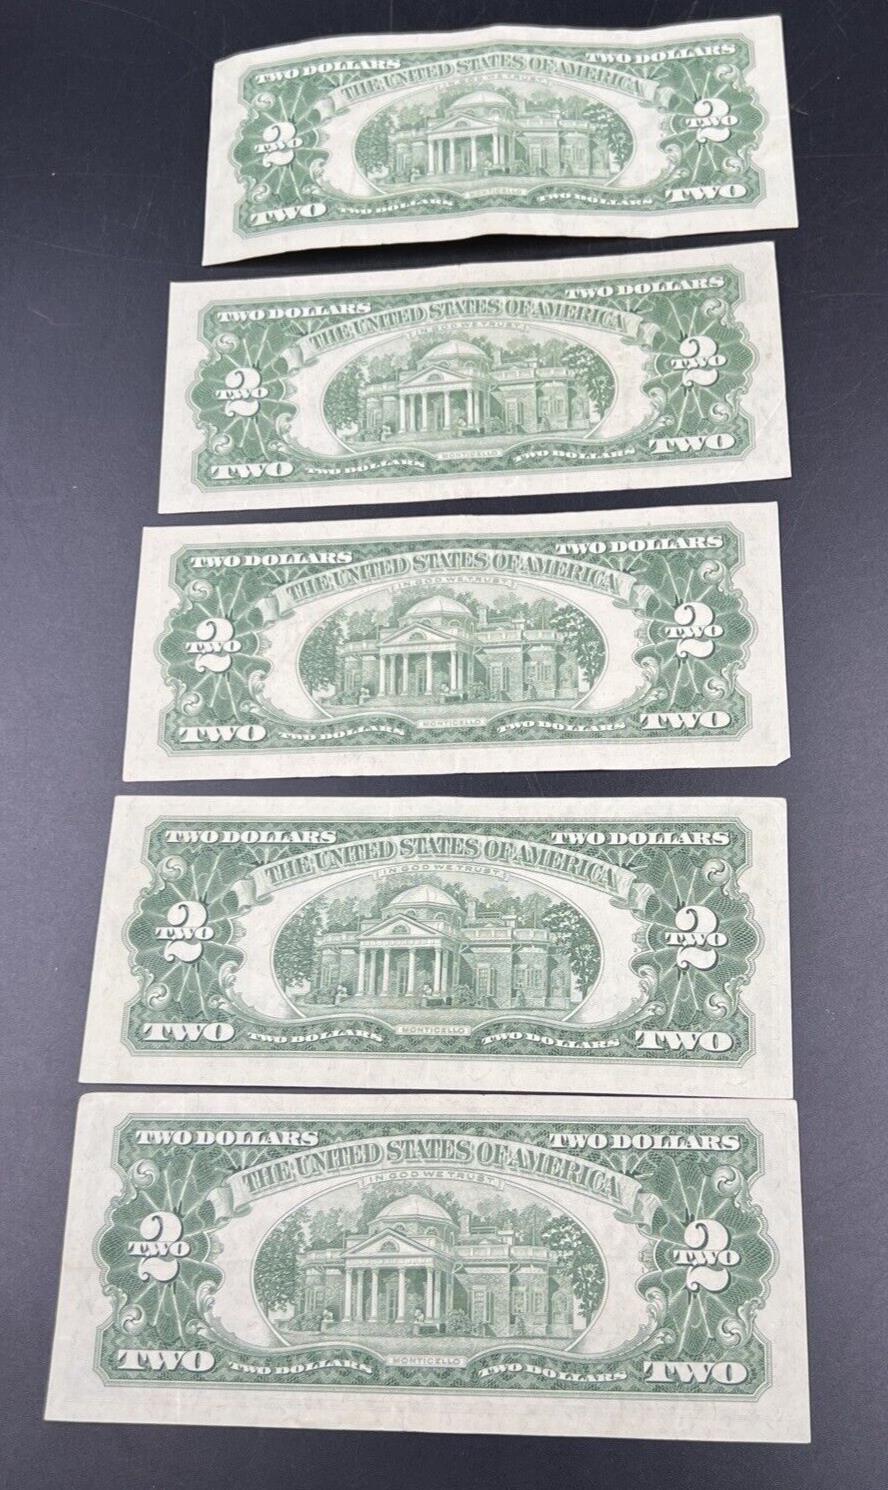 Lot of 5 1963 $2 Two Dollar Red Seal Legal Tender Banknotes VF + Circ #368